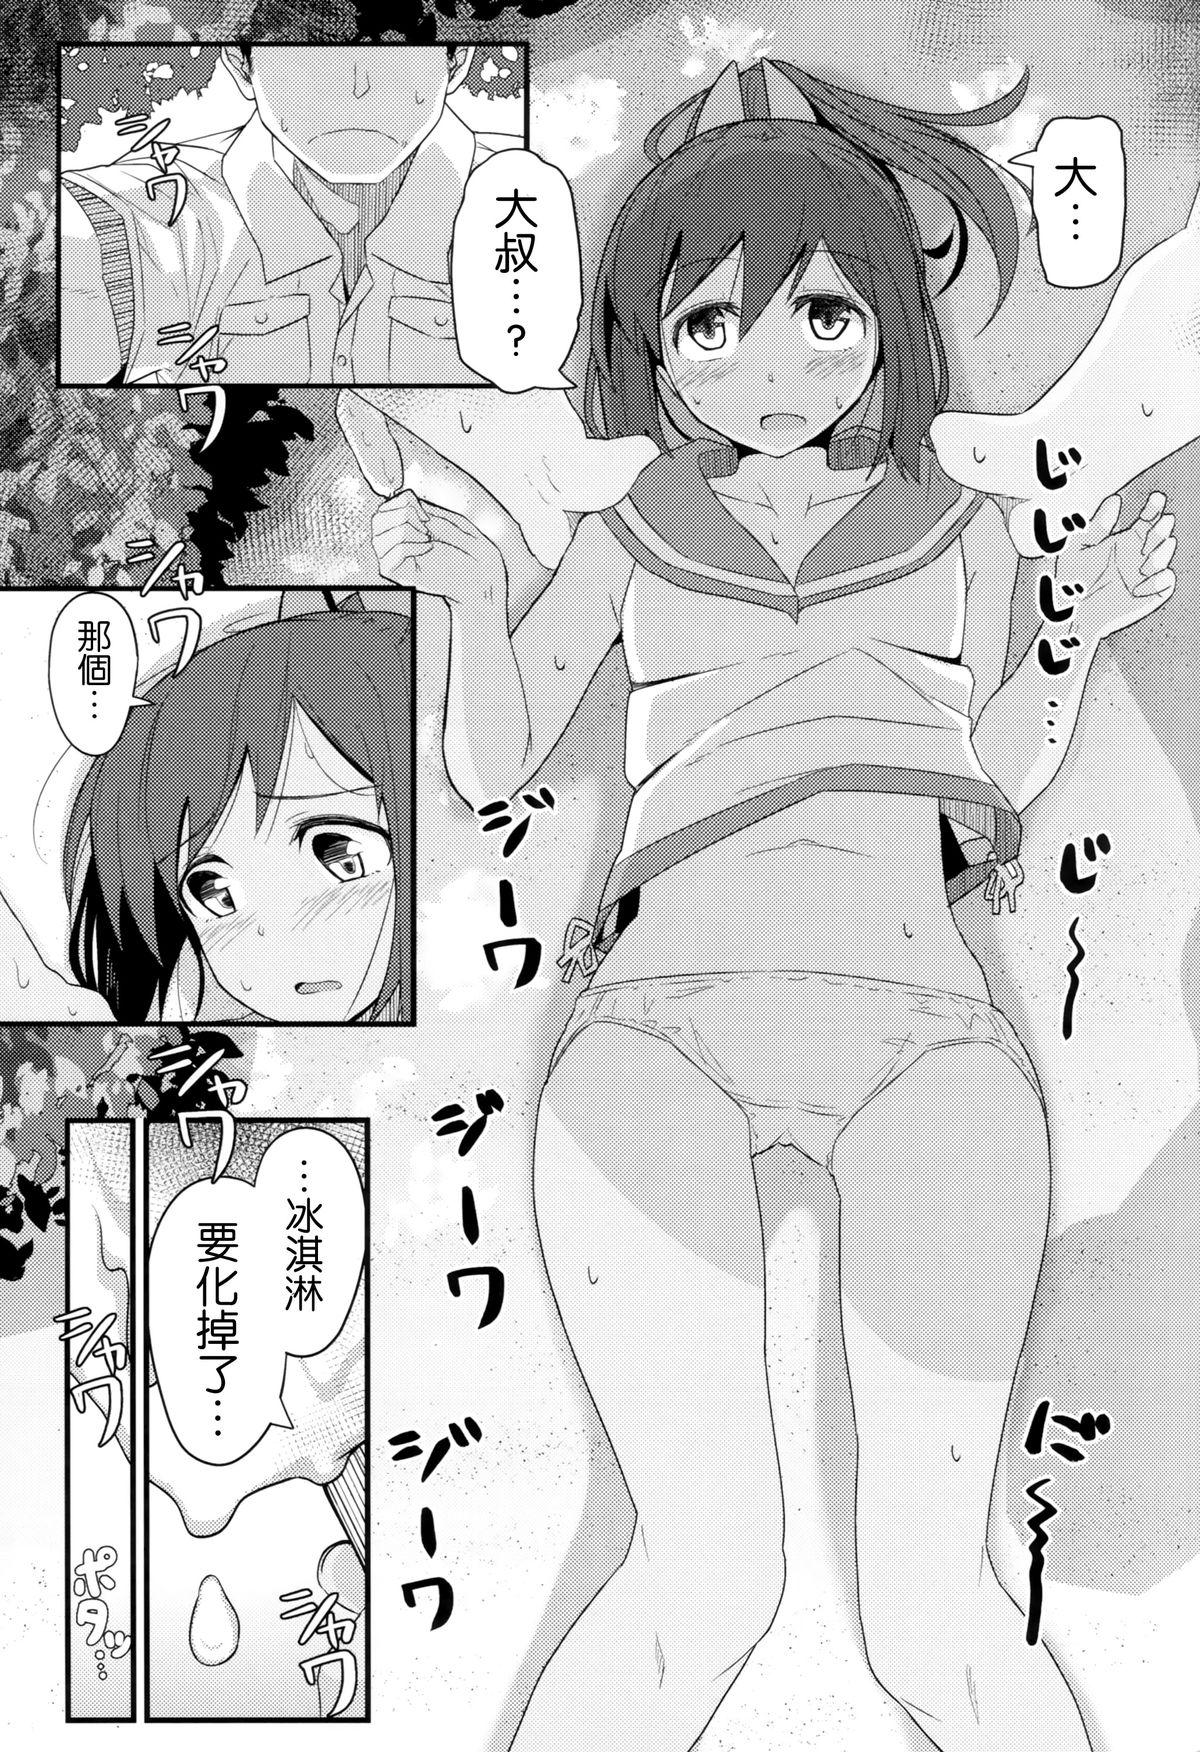 Stepsiblings GIRLFriend's 6 - Kantai collection 1080p - Page 8